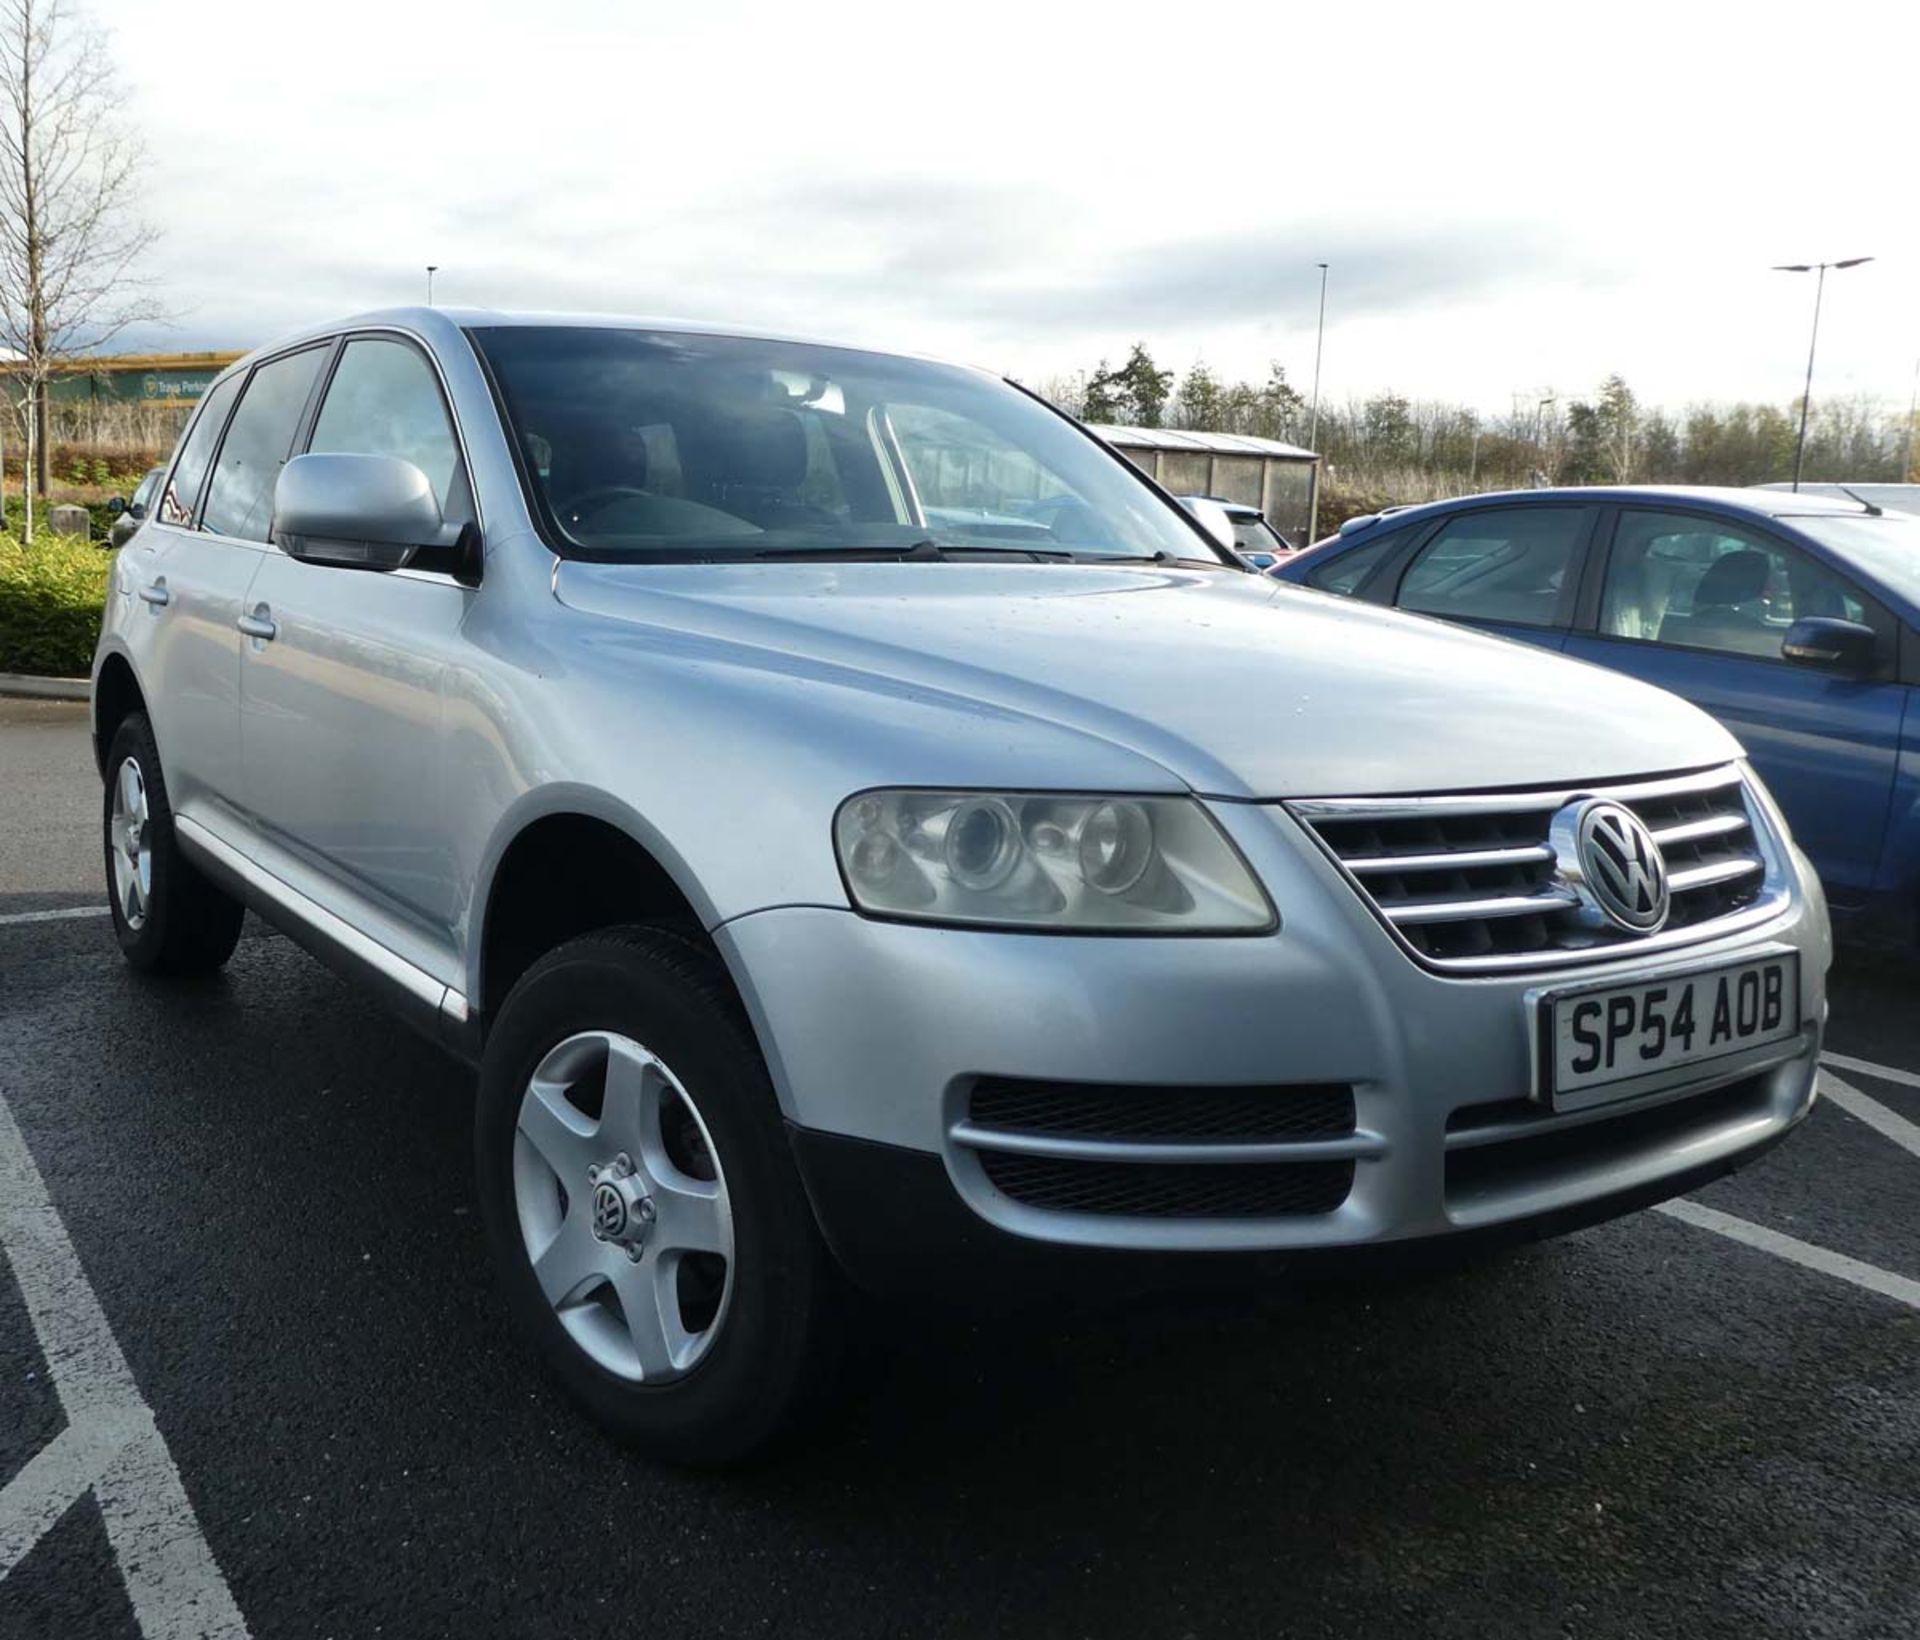 SP54 AOB (2004) Volkswagen Estate Touareg TDI in silver, 2461cc, diesel, 3 former keepers, 1 key, - Image 2 of 12